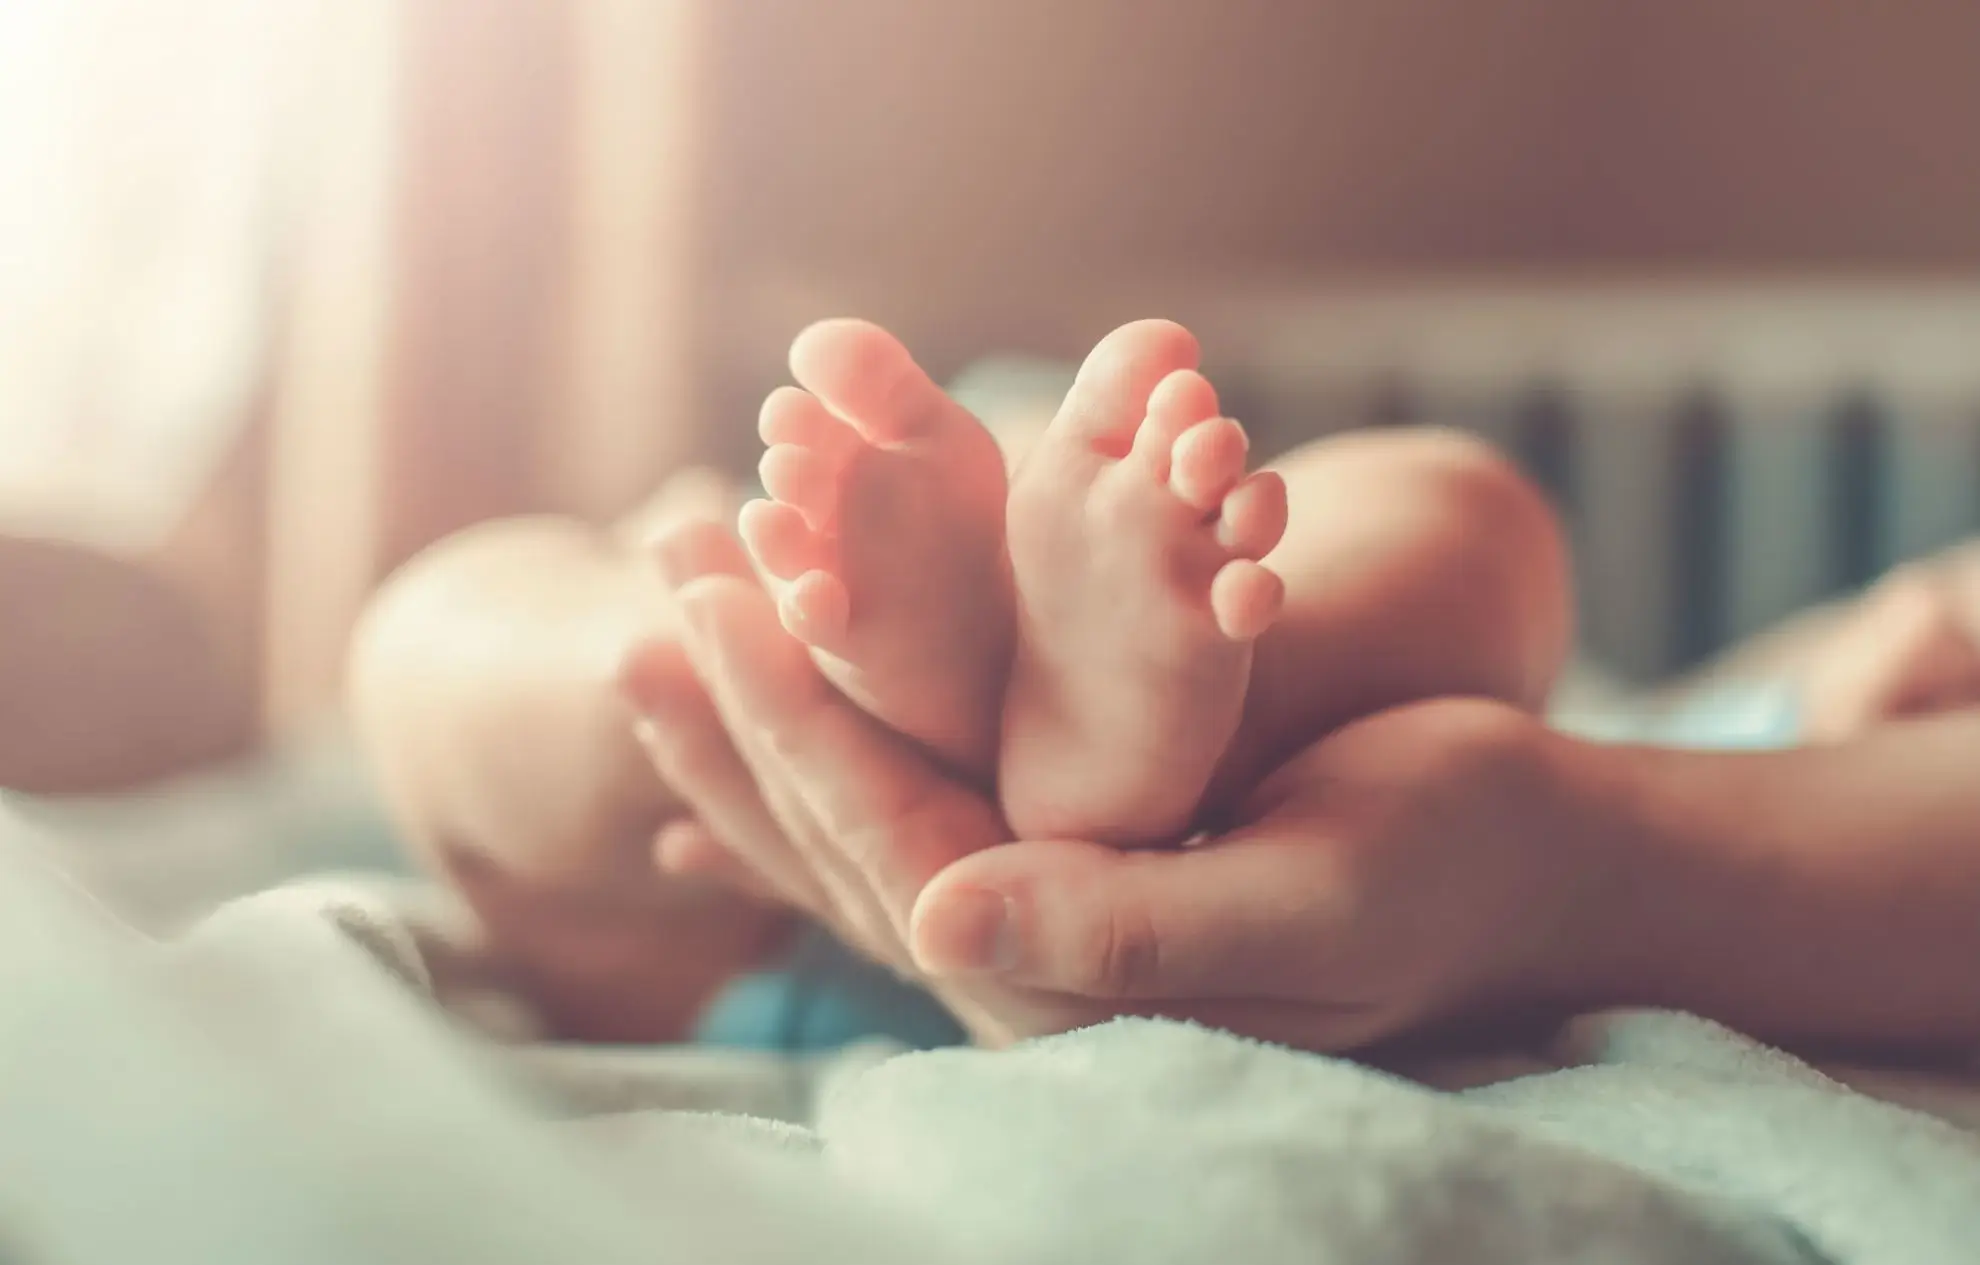 feet-of-new-born-baby-in-hands-of-parents-84BXQ94-min (1)